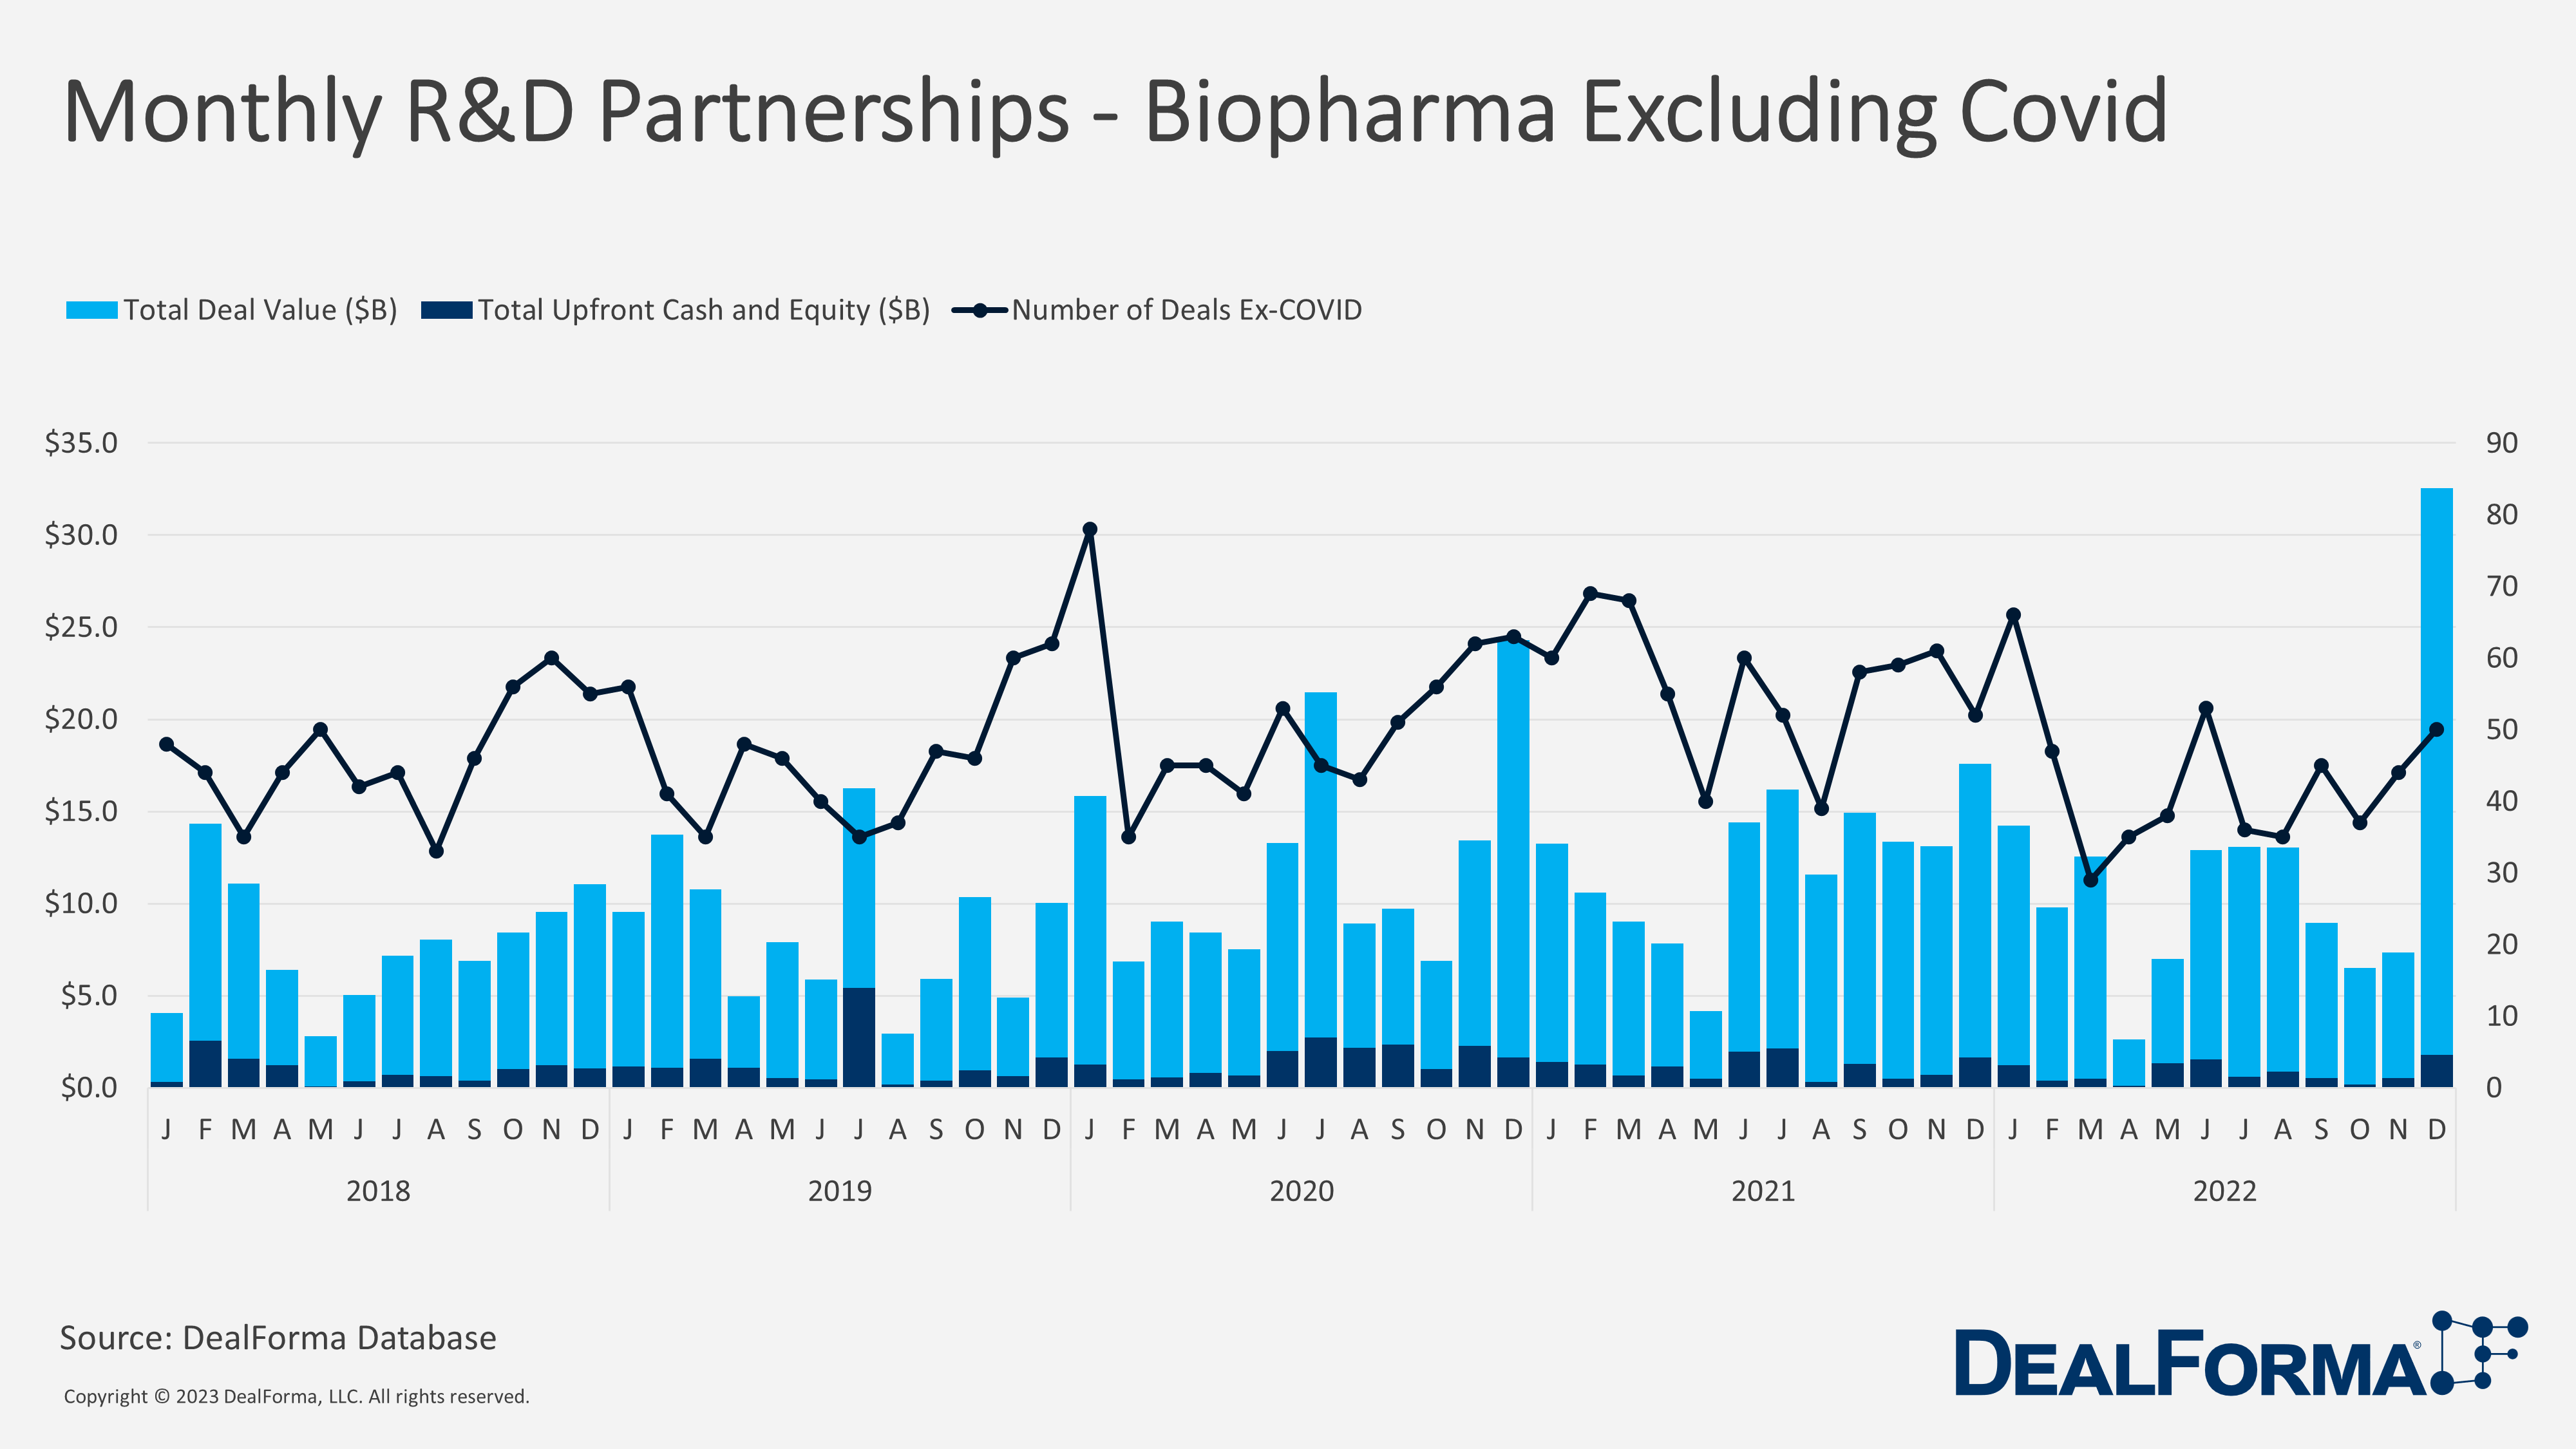 Monthly R&D Partnerships - Biopharma Excluding Corona/Covid